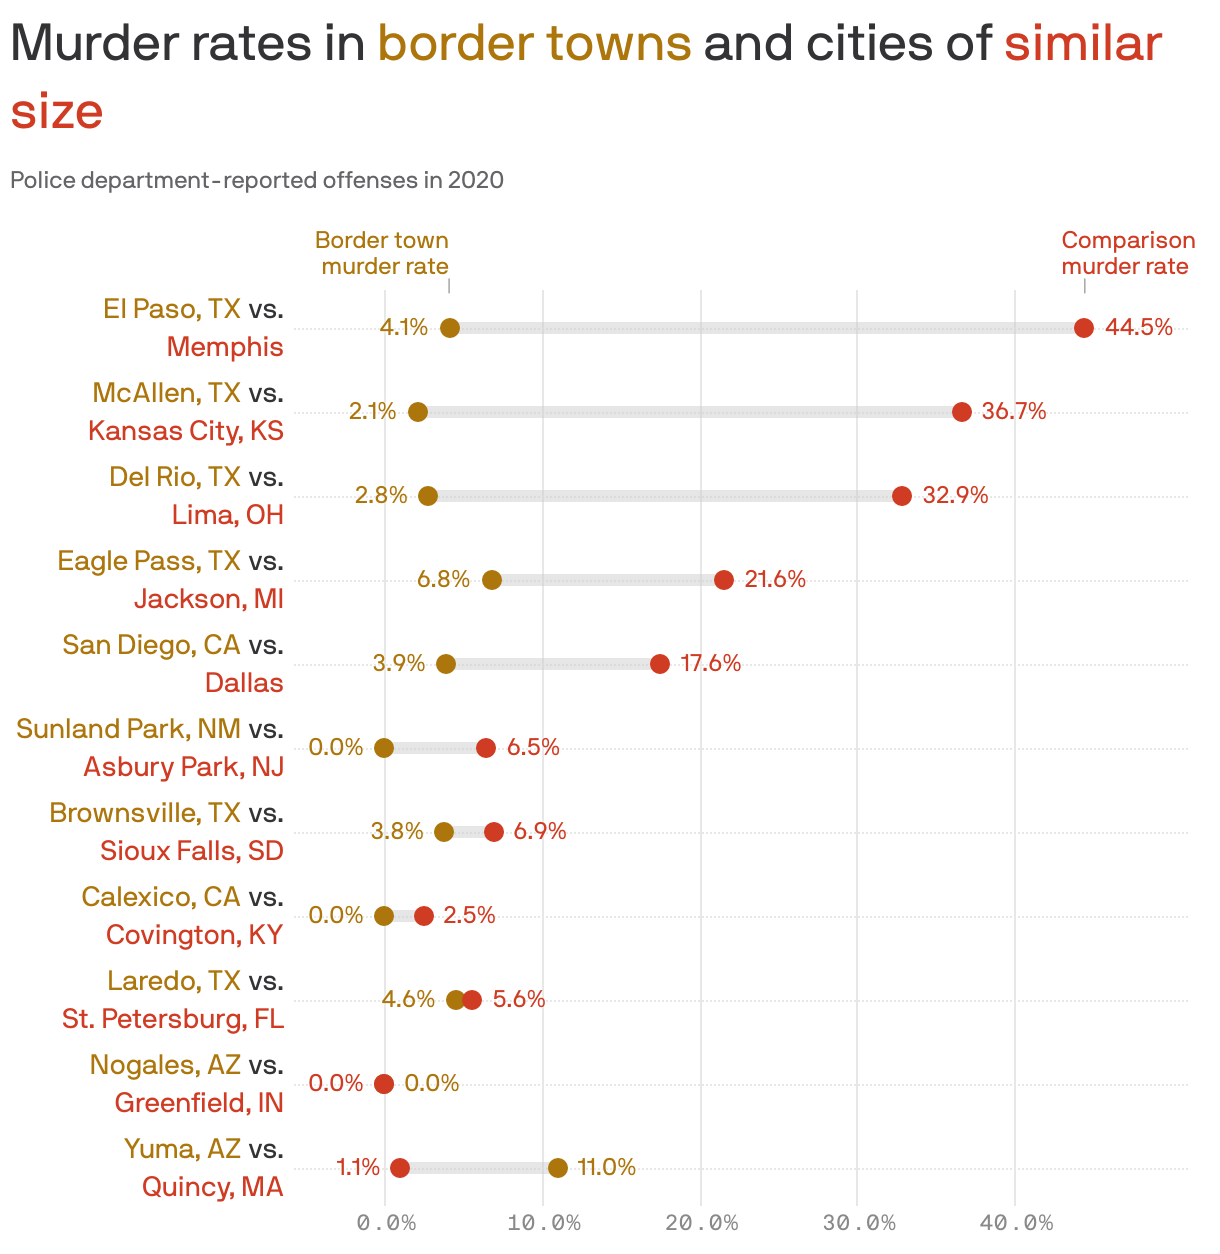 Murder rates in <span style='color:#AC760C'>border towns</span> and cities of <span style='color:#d03c23''>similar size</span>